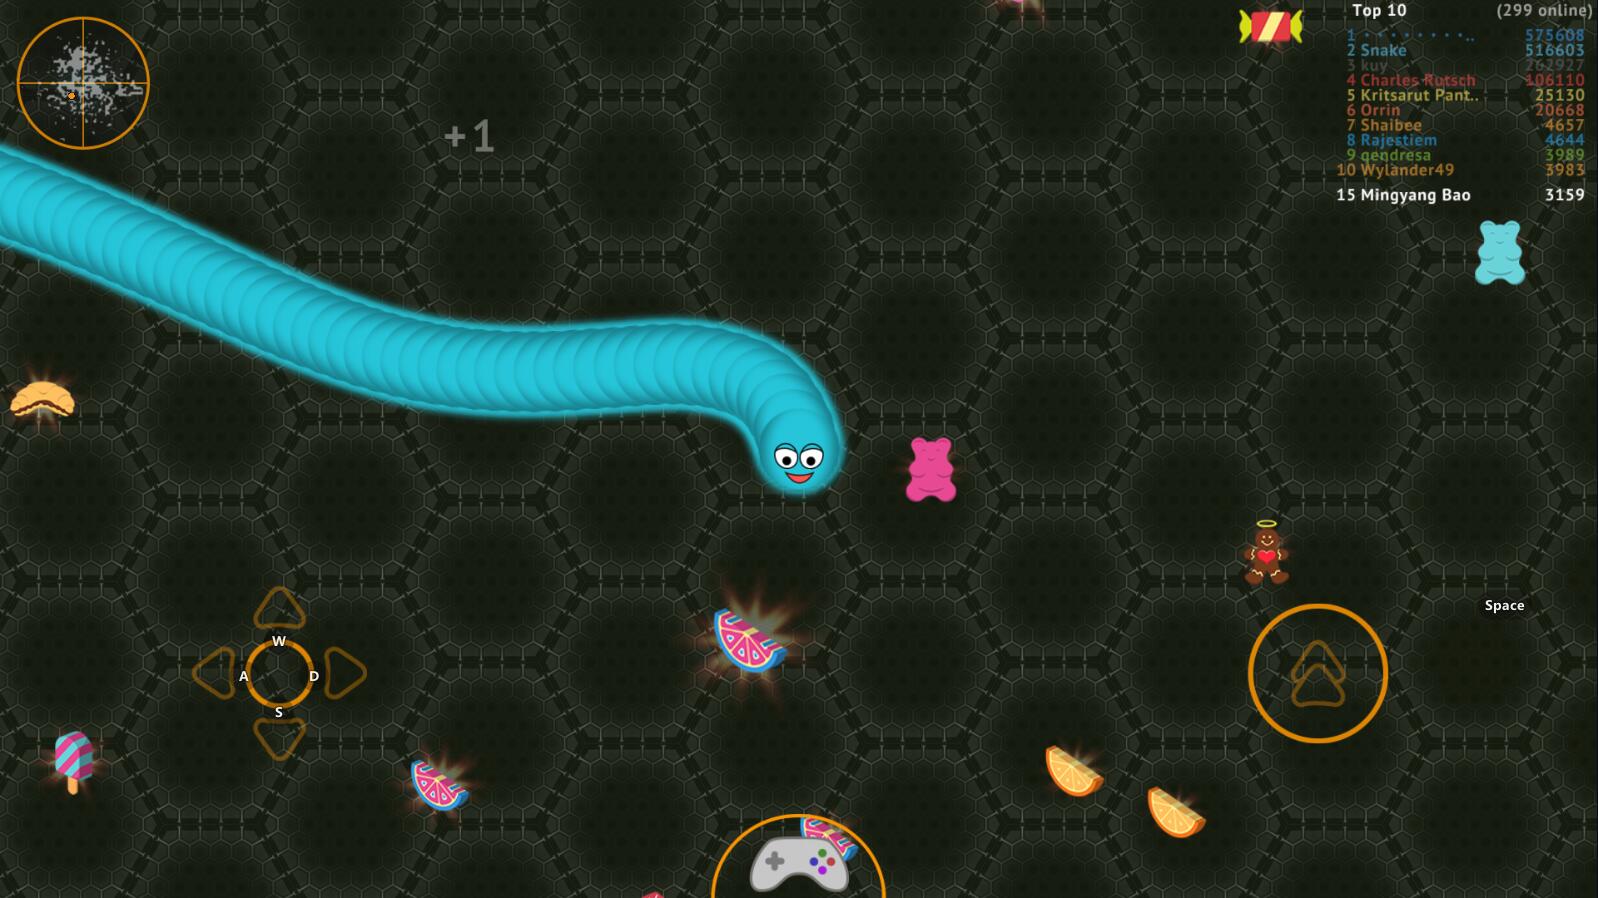 Snake.io, New Skin Unlocked, Playing 390 Games For this Skin 🔥 